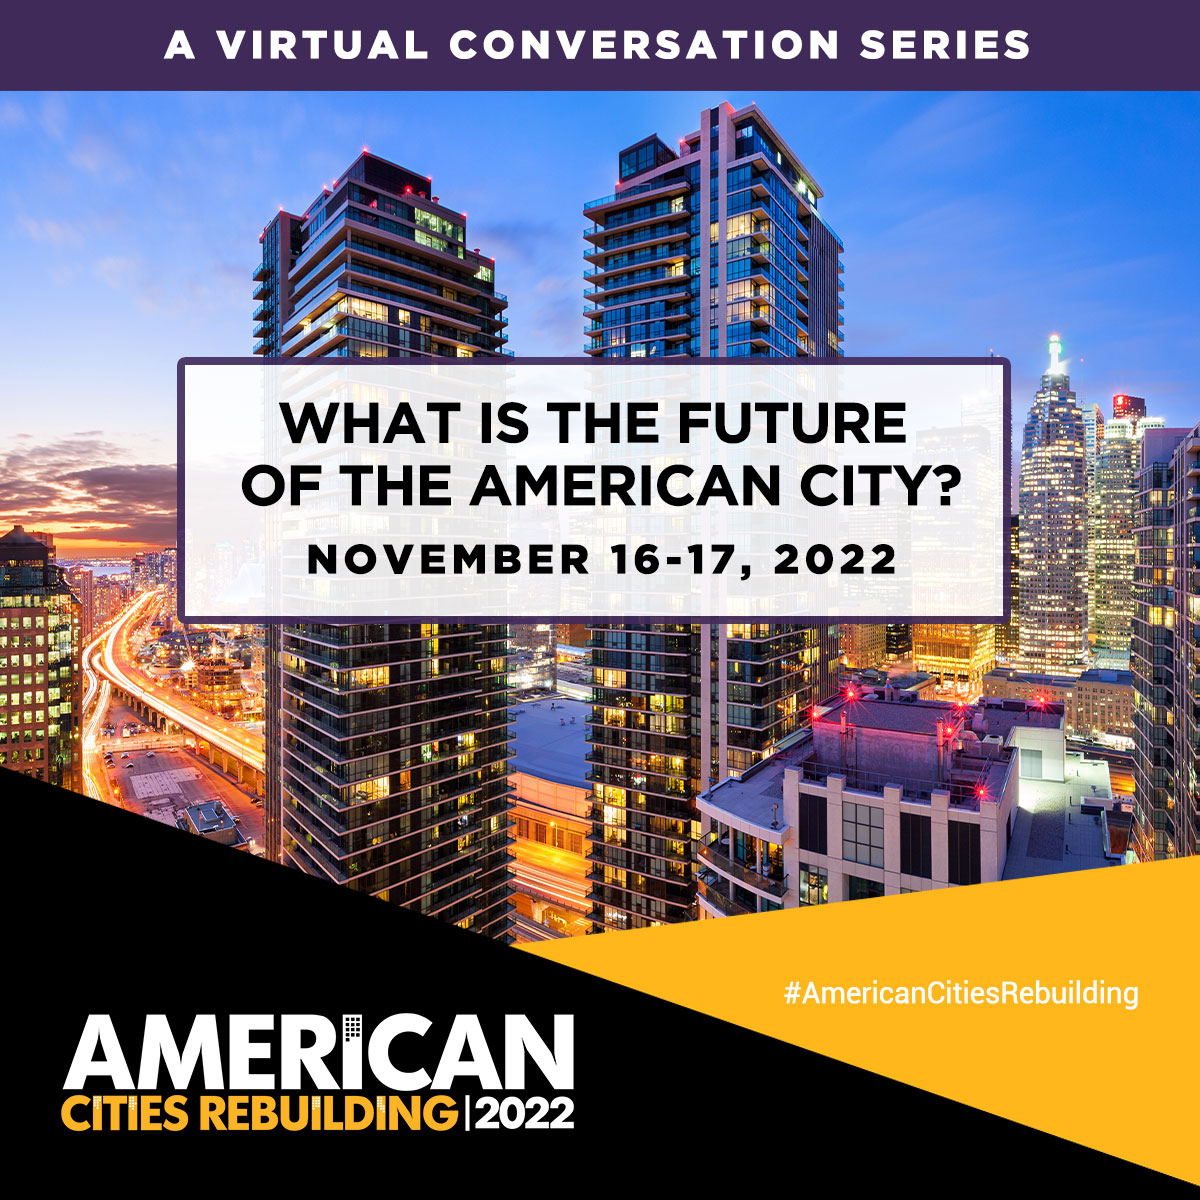 Going on now! Join the #AmericanCitiesRebuilding virtual conference, welcoming experts and thought leaders working to elevate their communities. Register at wnet.org/acr.